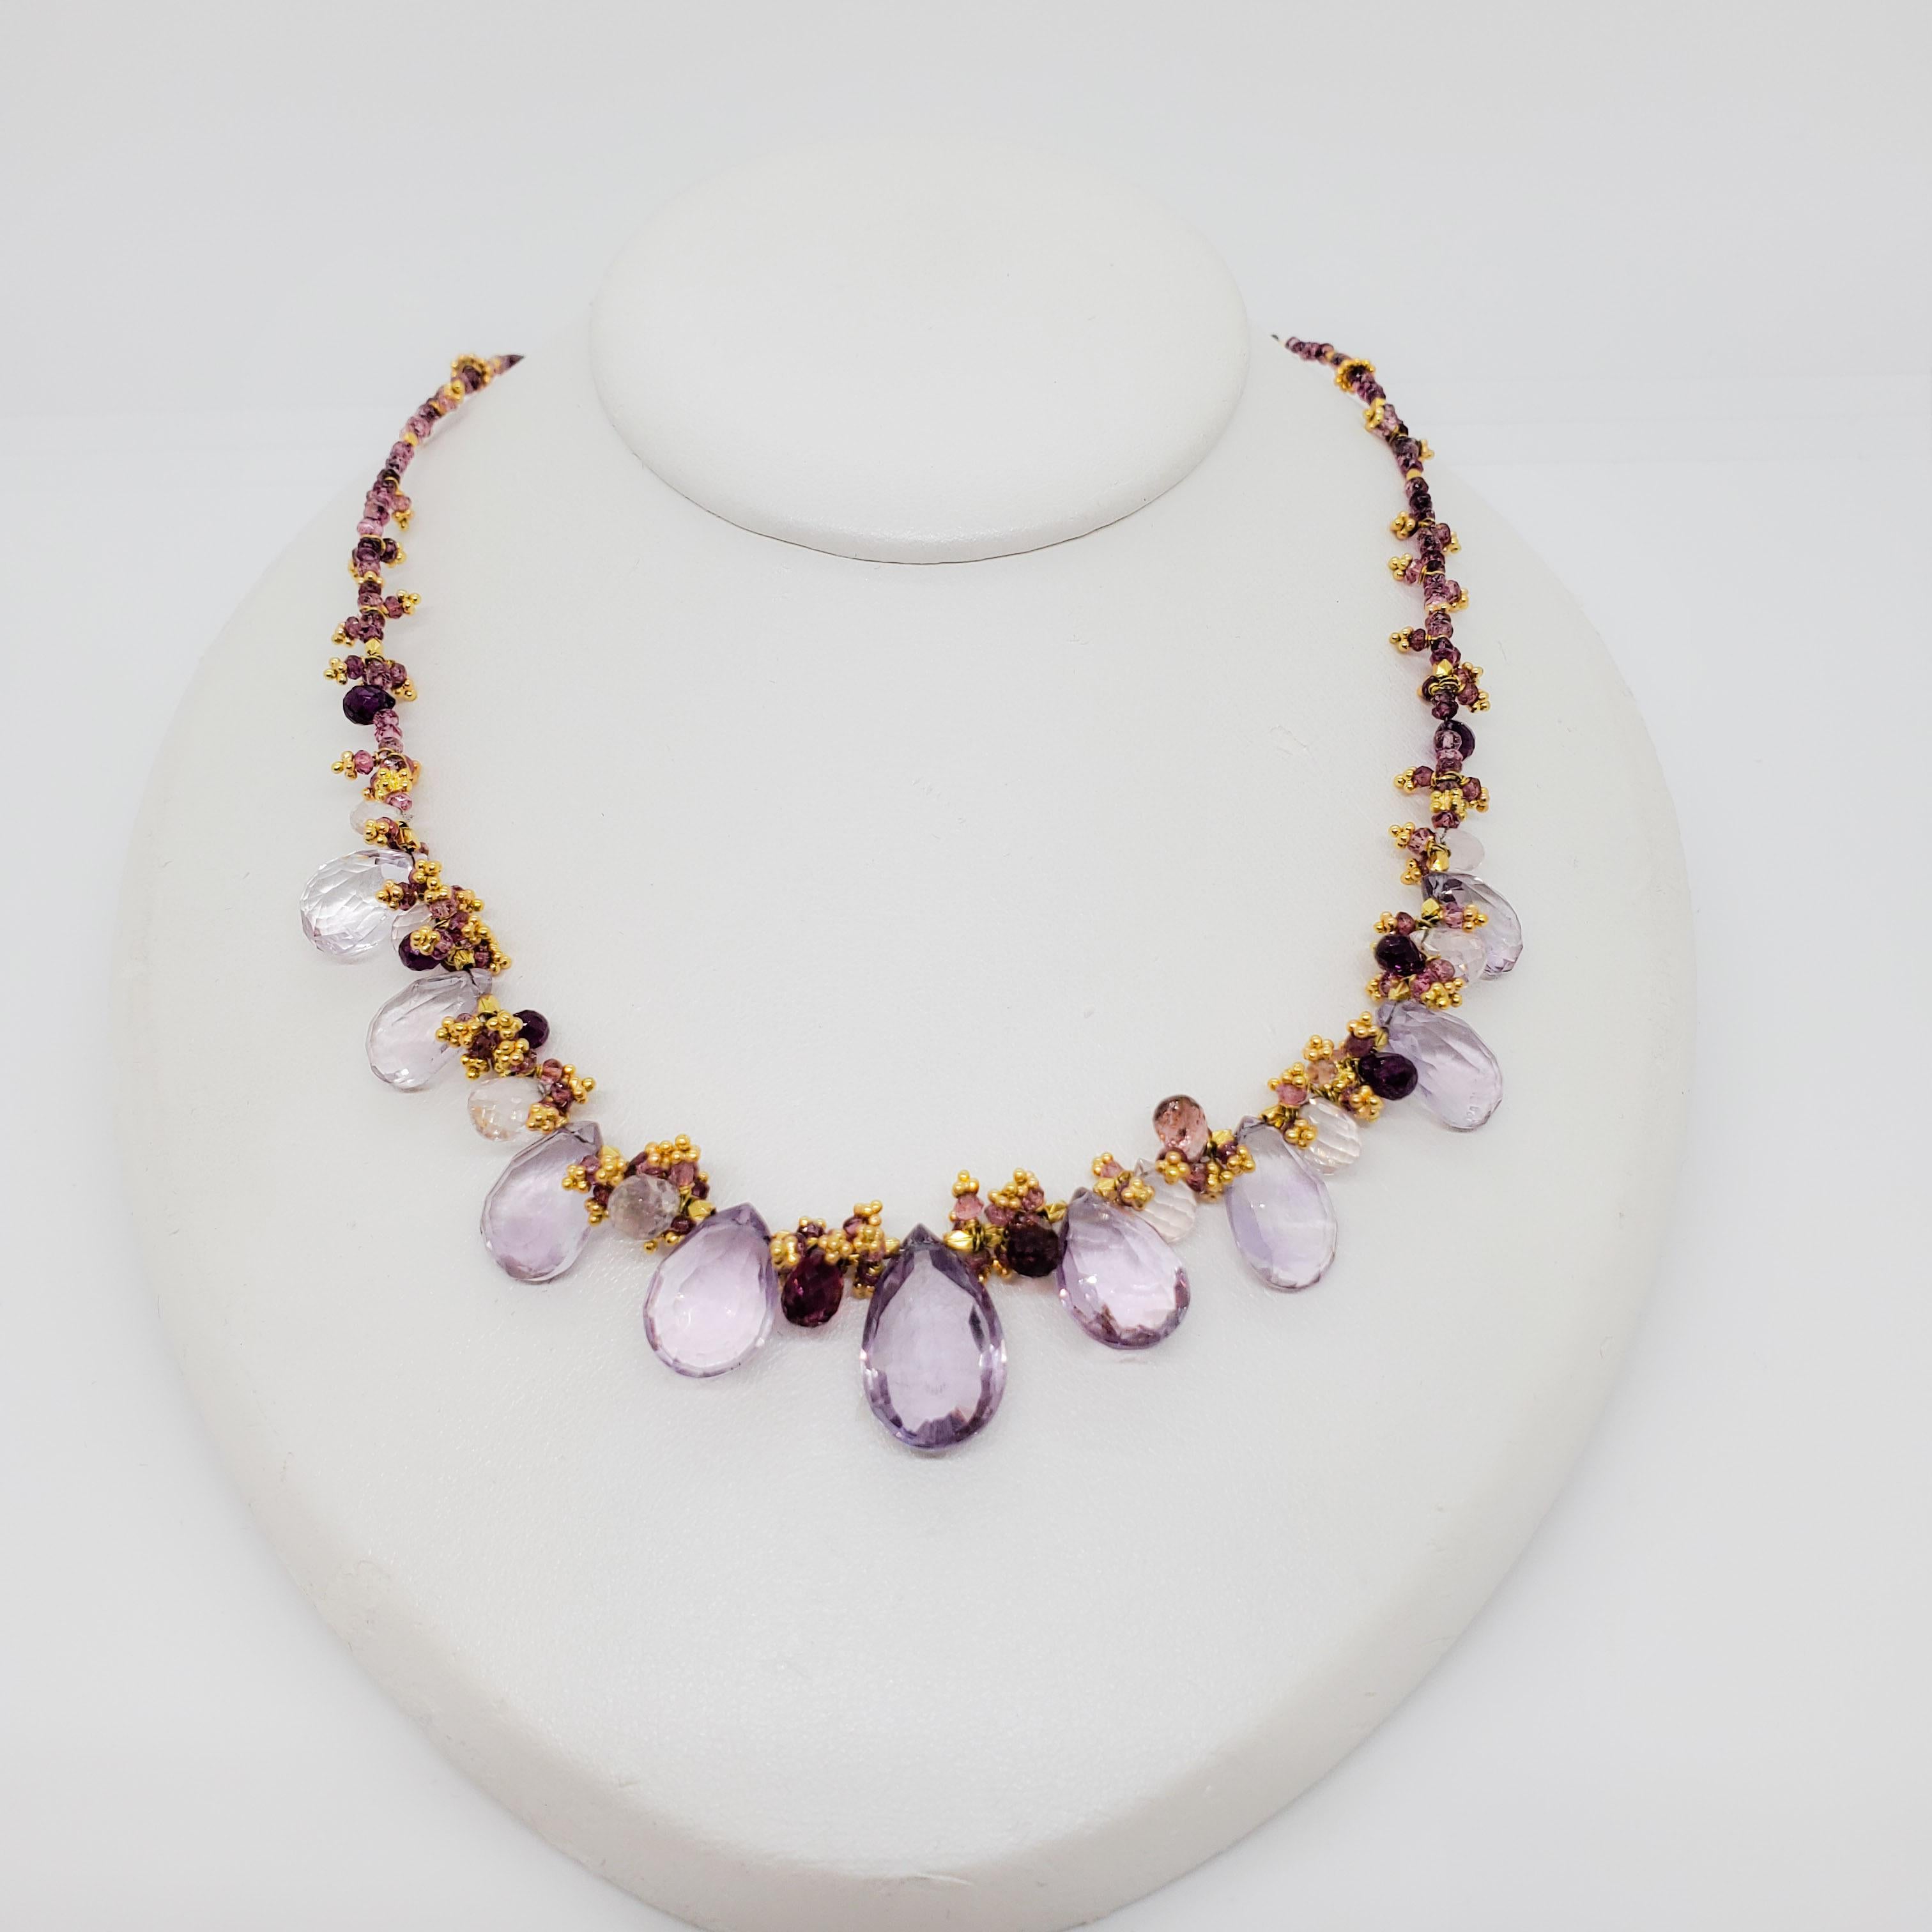 Beautiful amethyst multi shape necklace in 18k yellow gold.  Length is 16